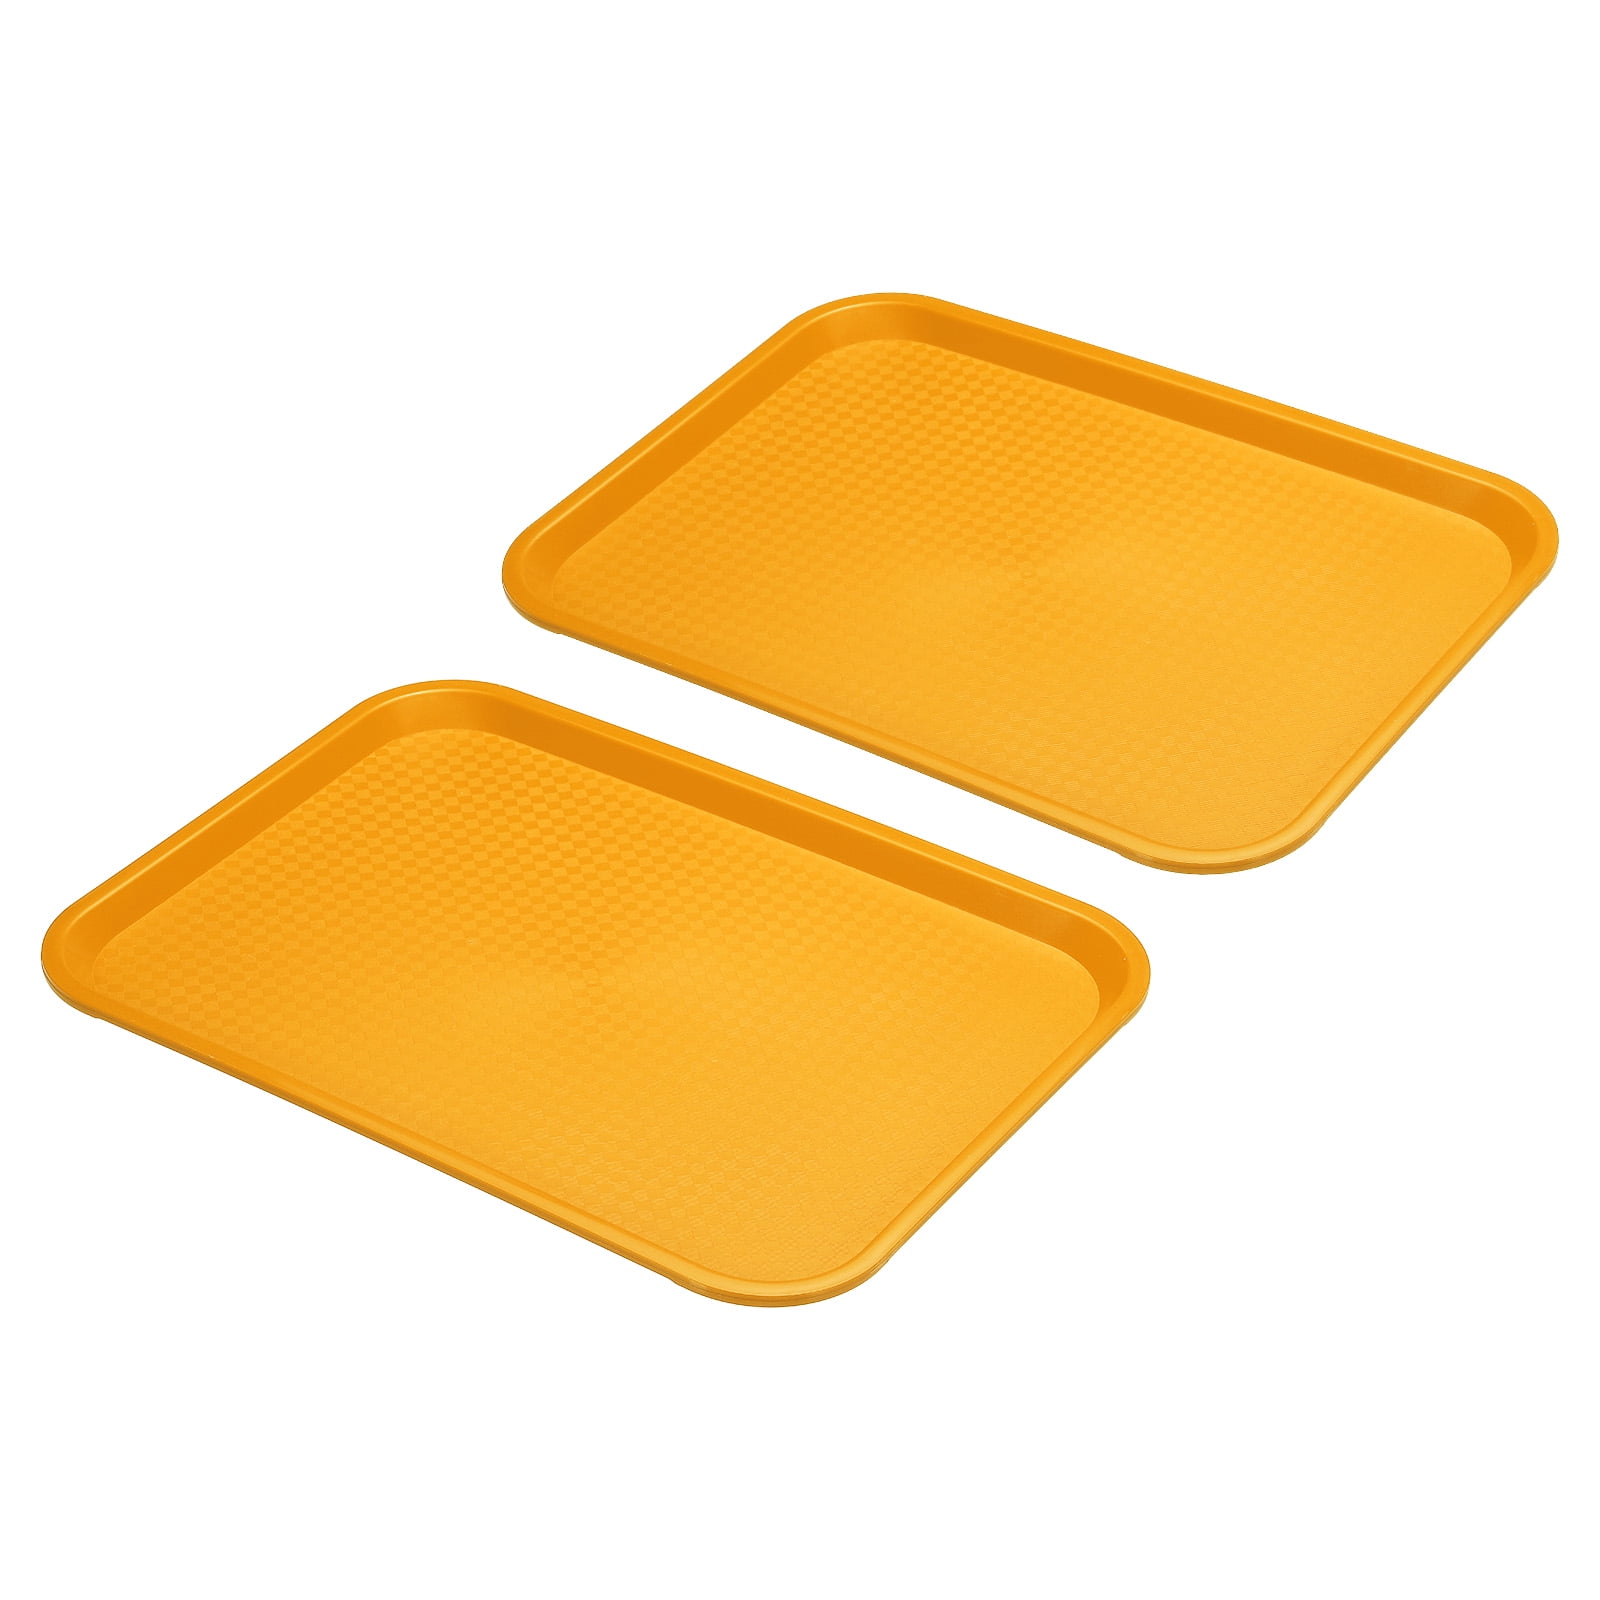 Uxcell 14x11 Fast Food Tray, 2 Pack PP Plastic Multi-Purpose